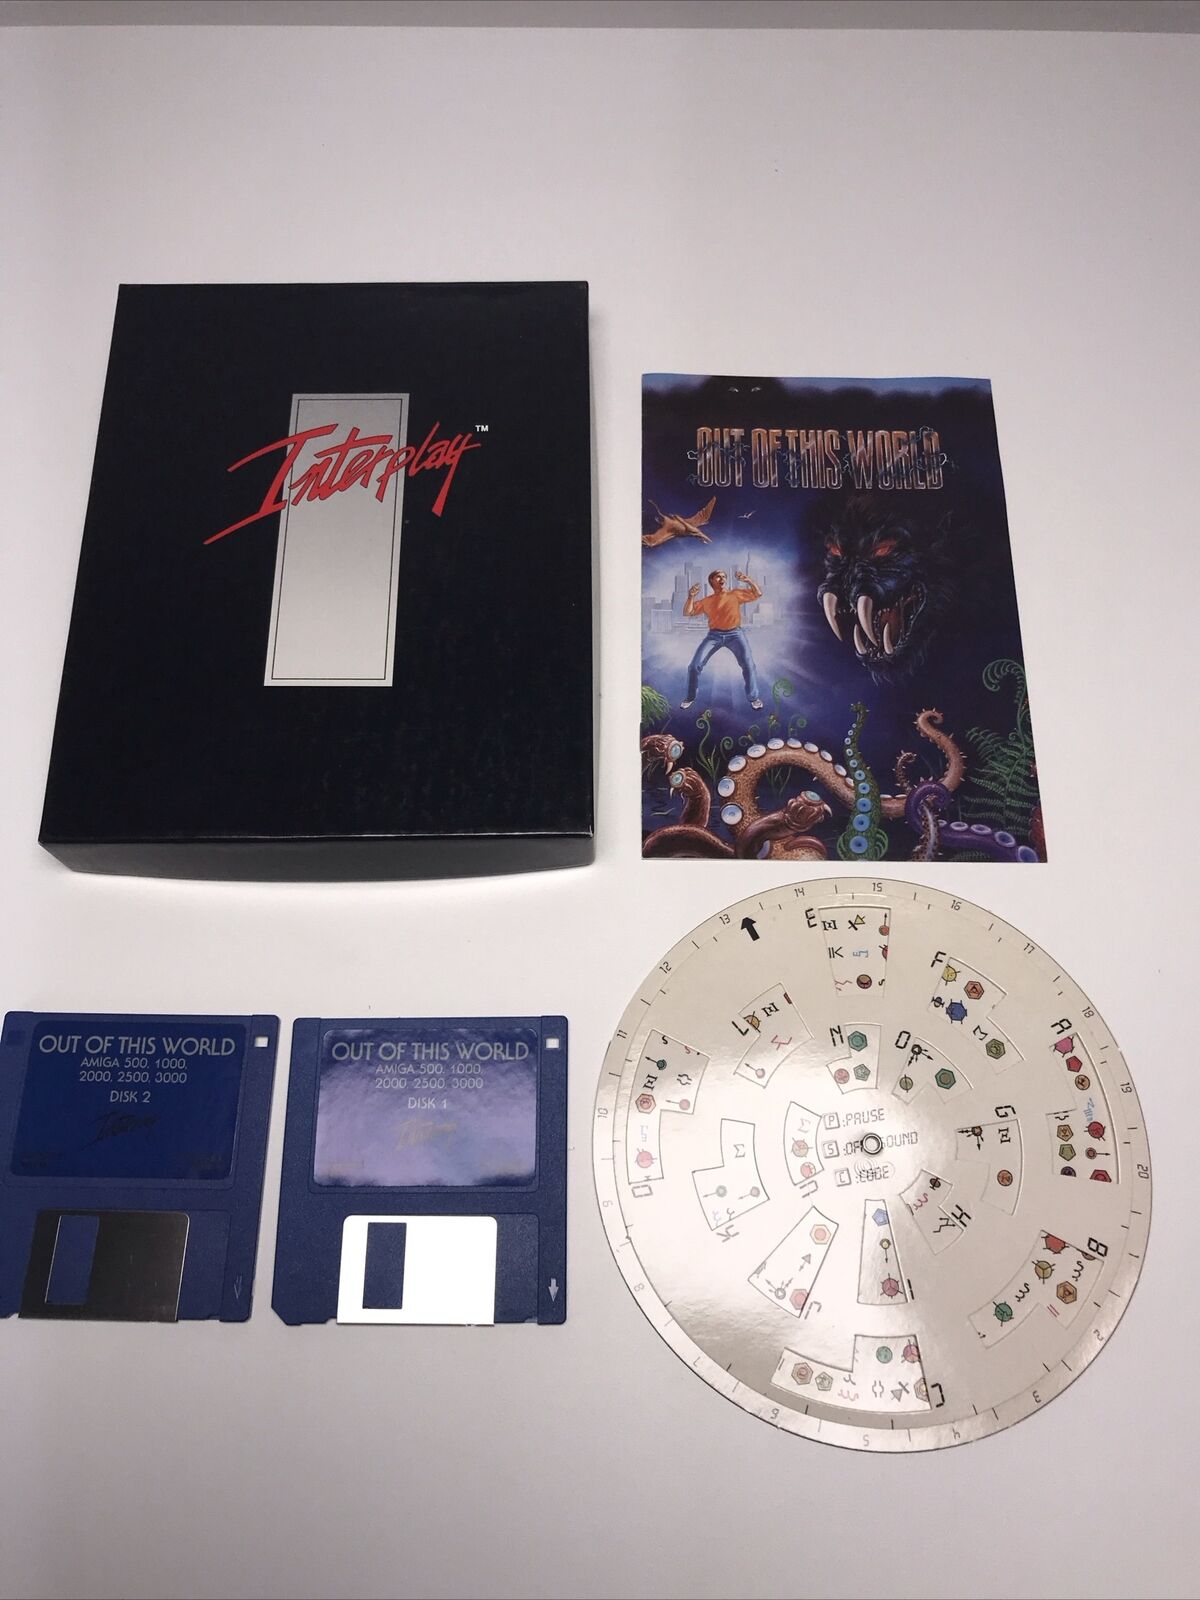 Commodore Amiga Game 1991 - OUT OF THIS WORLD - The Only One Available